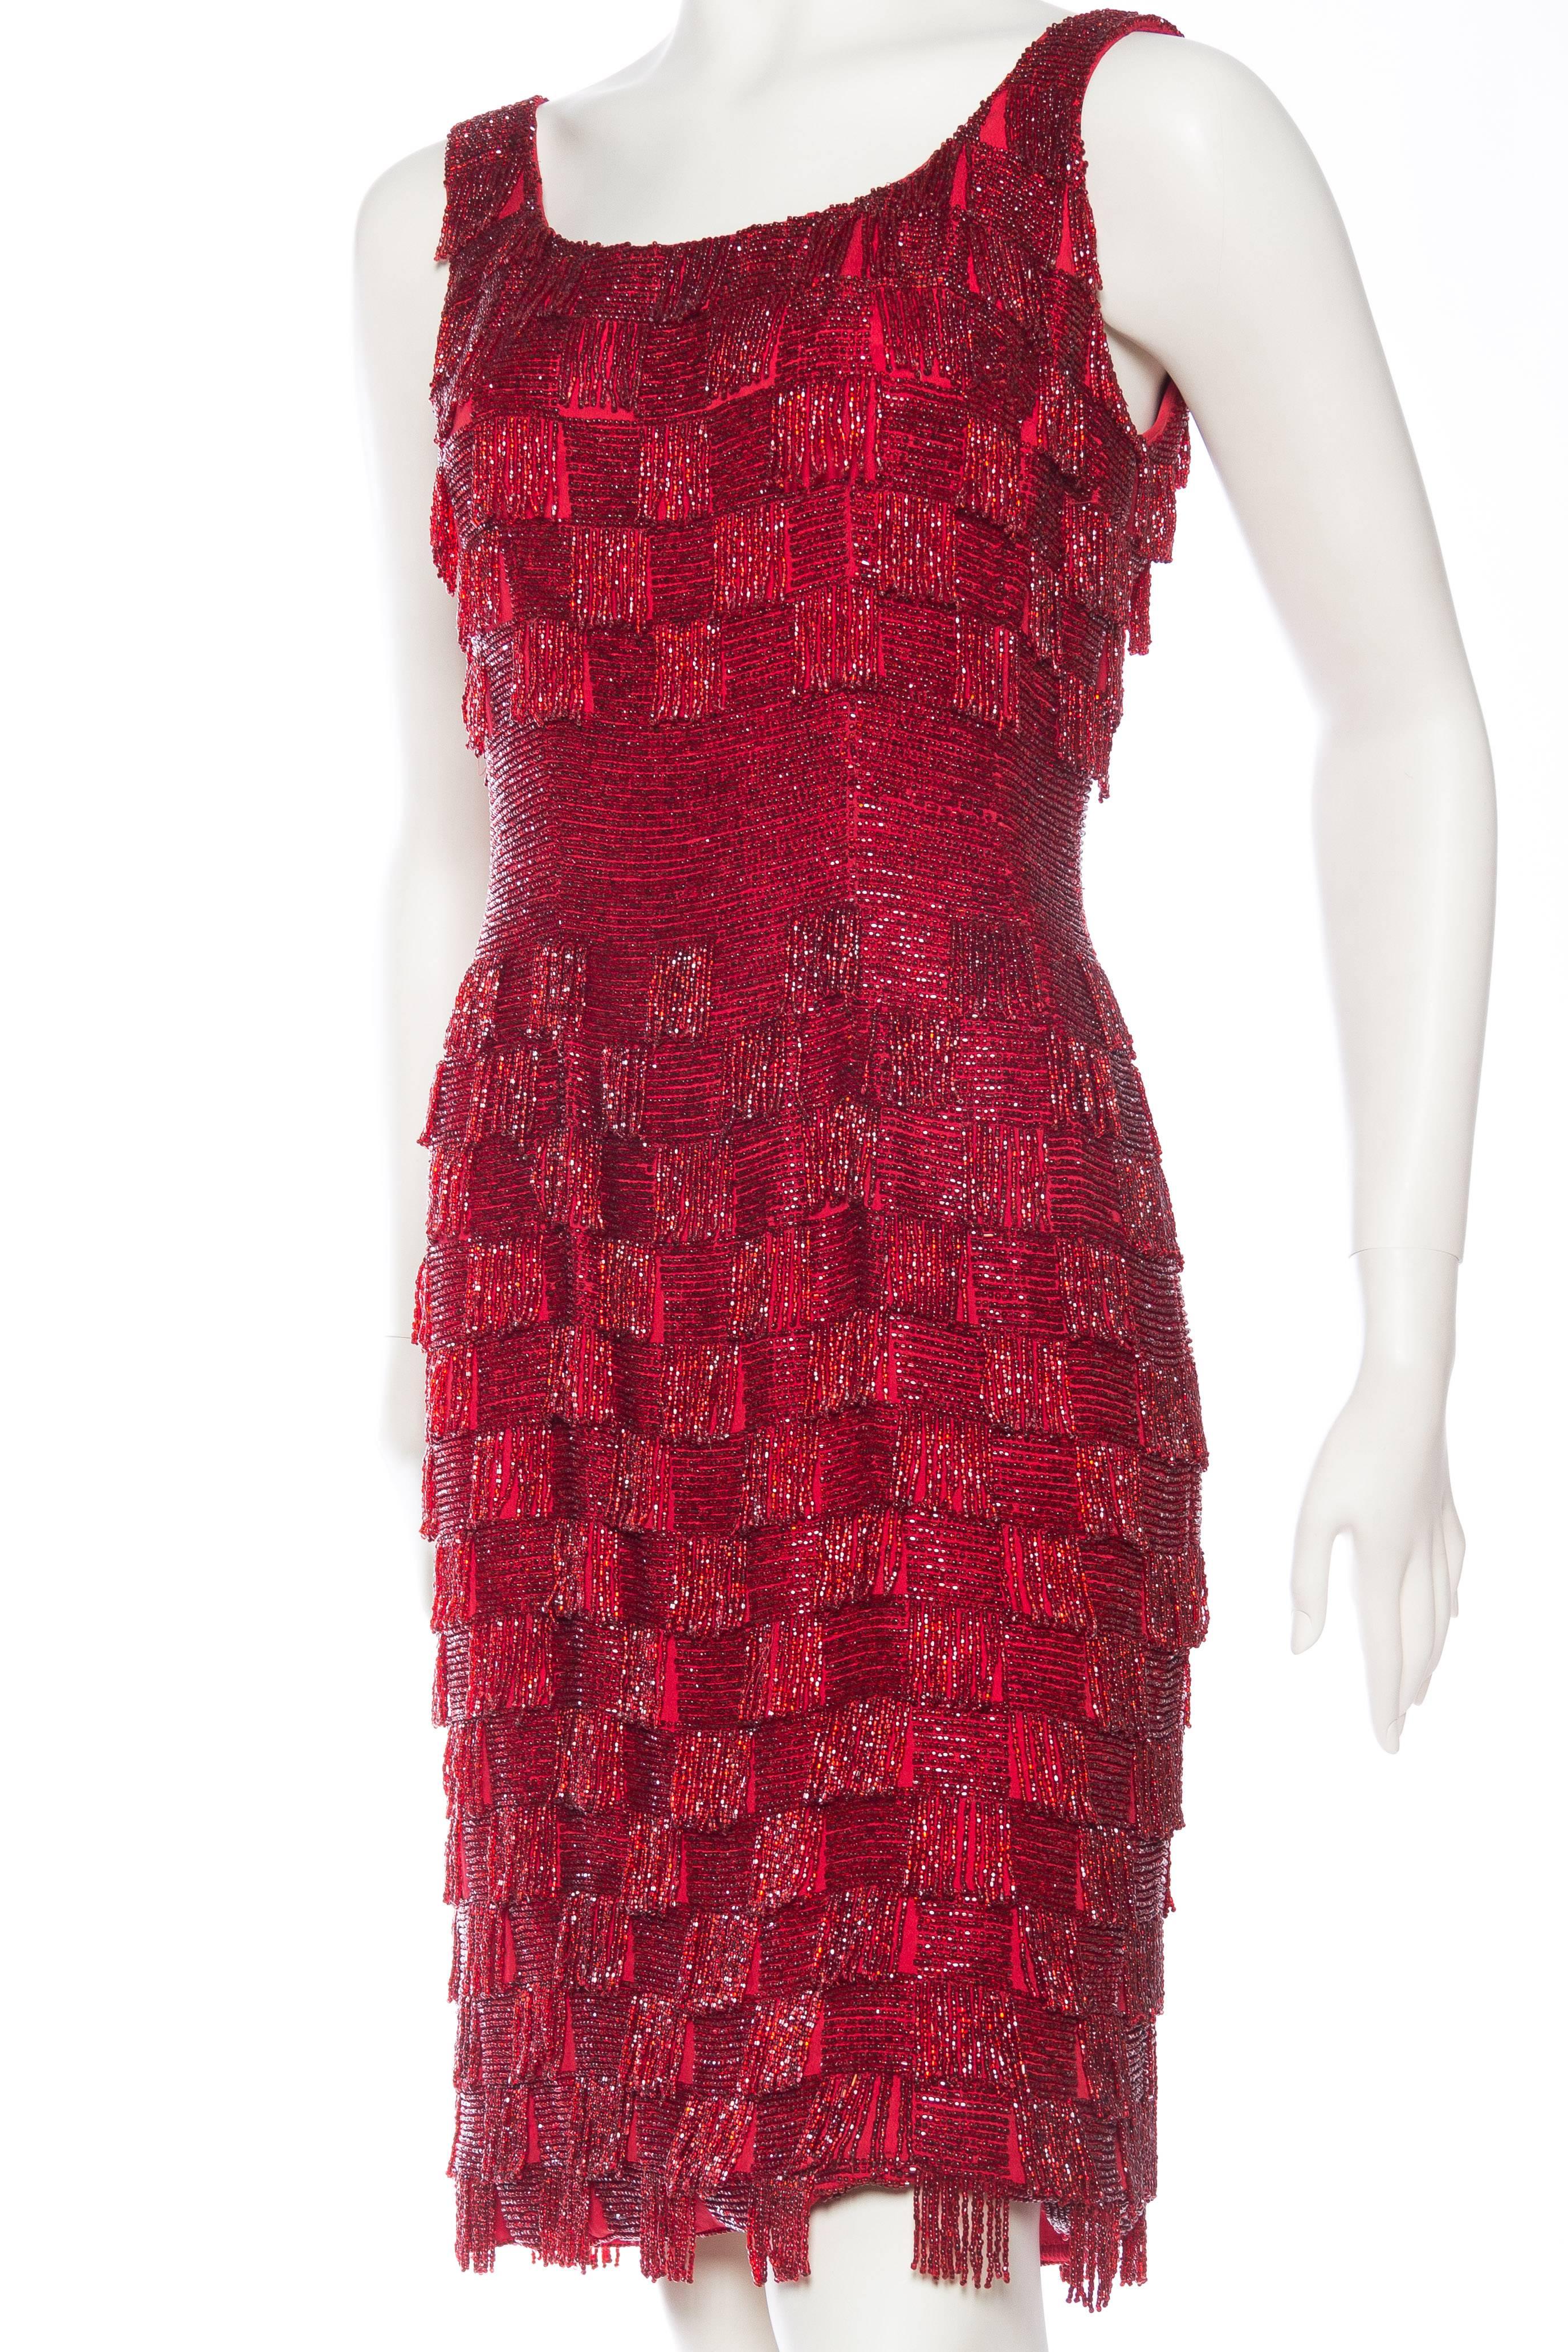 Red 1950s Solid Beaded Fringe Dress Attributed to Jean Dessés